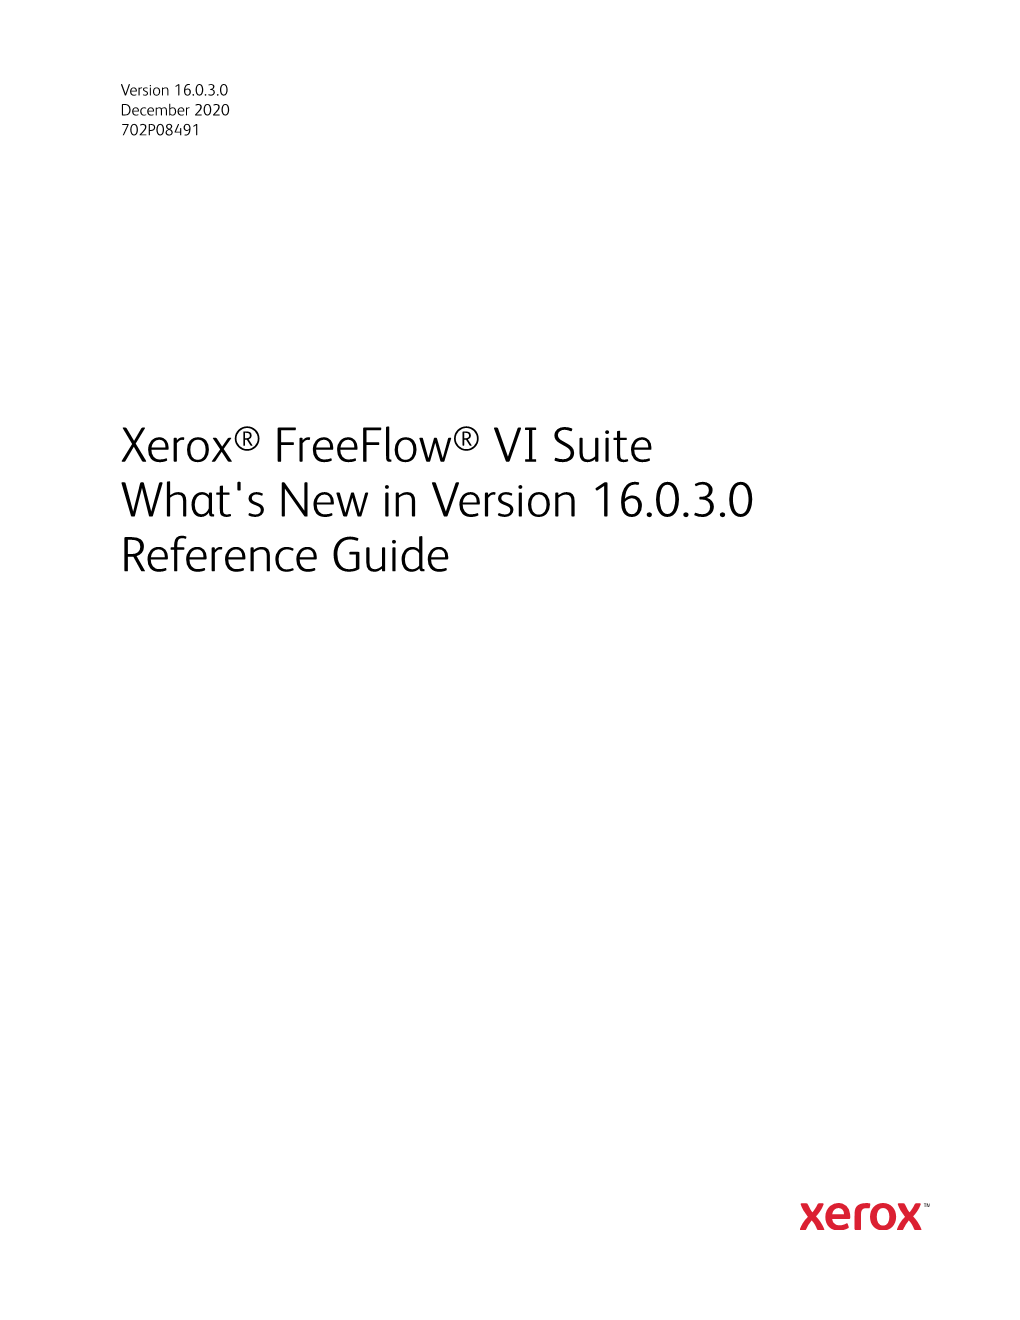 Xerox® Freeflow® VI Suite What's New in Version 16.0.3.0 Reference Guide © 2020 Xerox Corporation